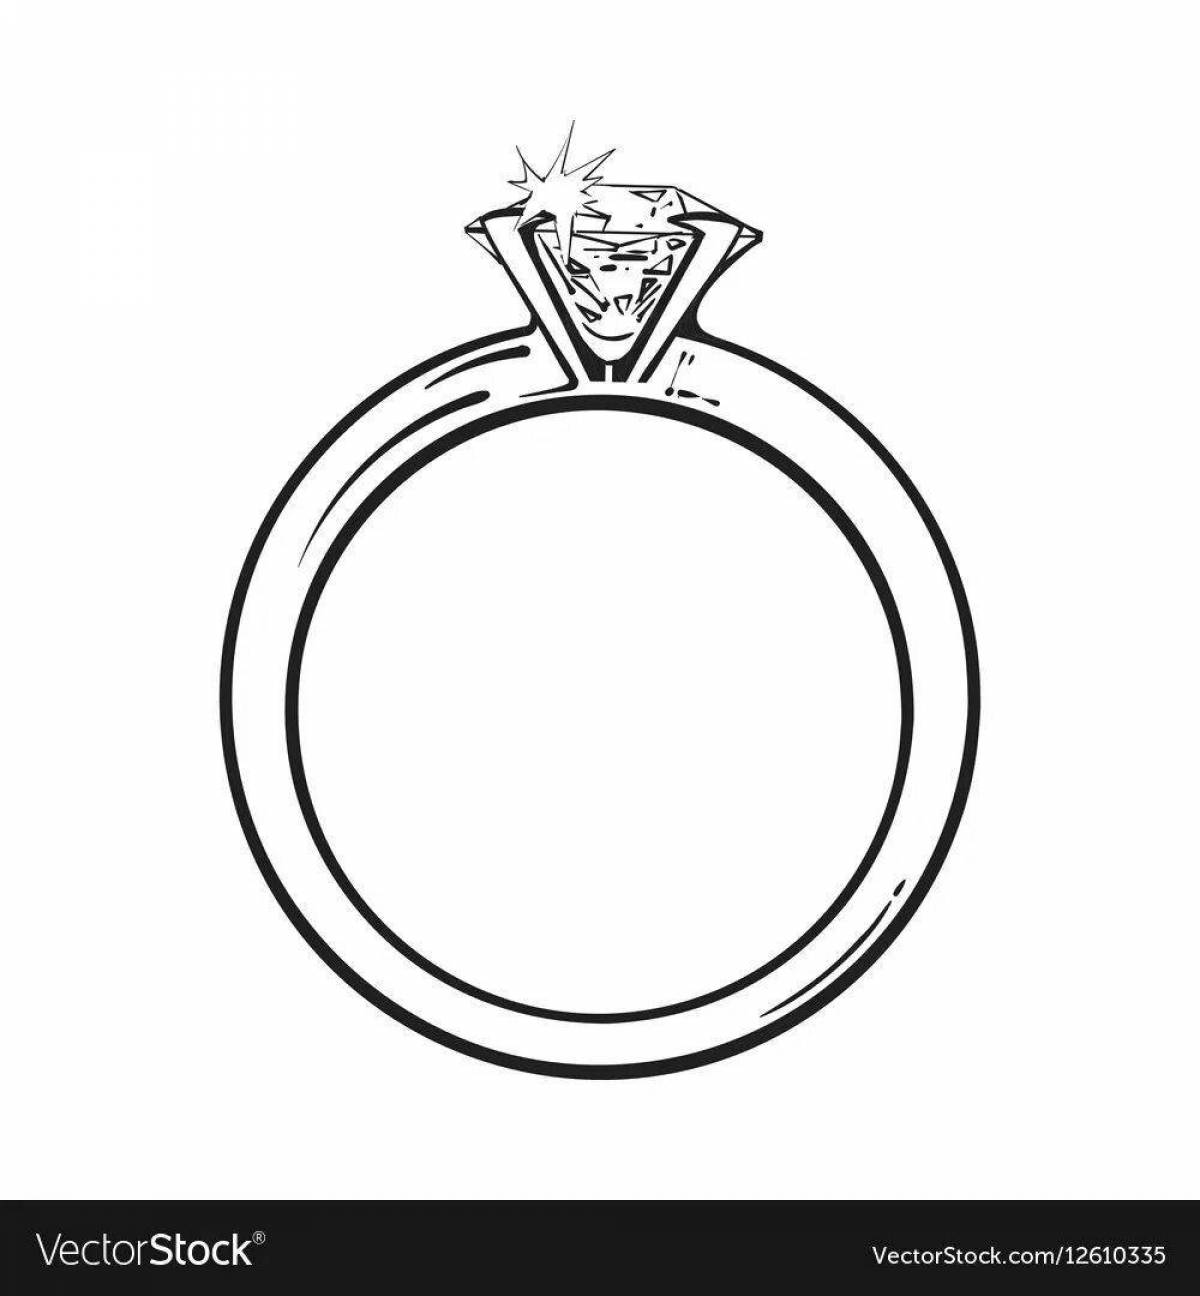 Brilliant coloring of the diamond ring